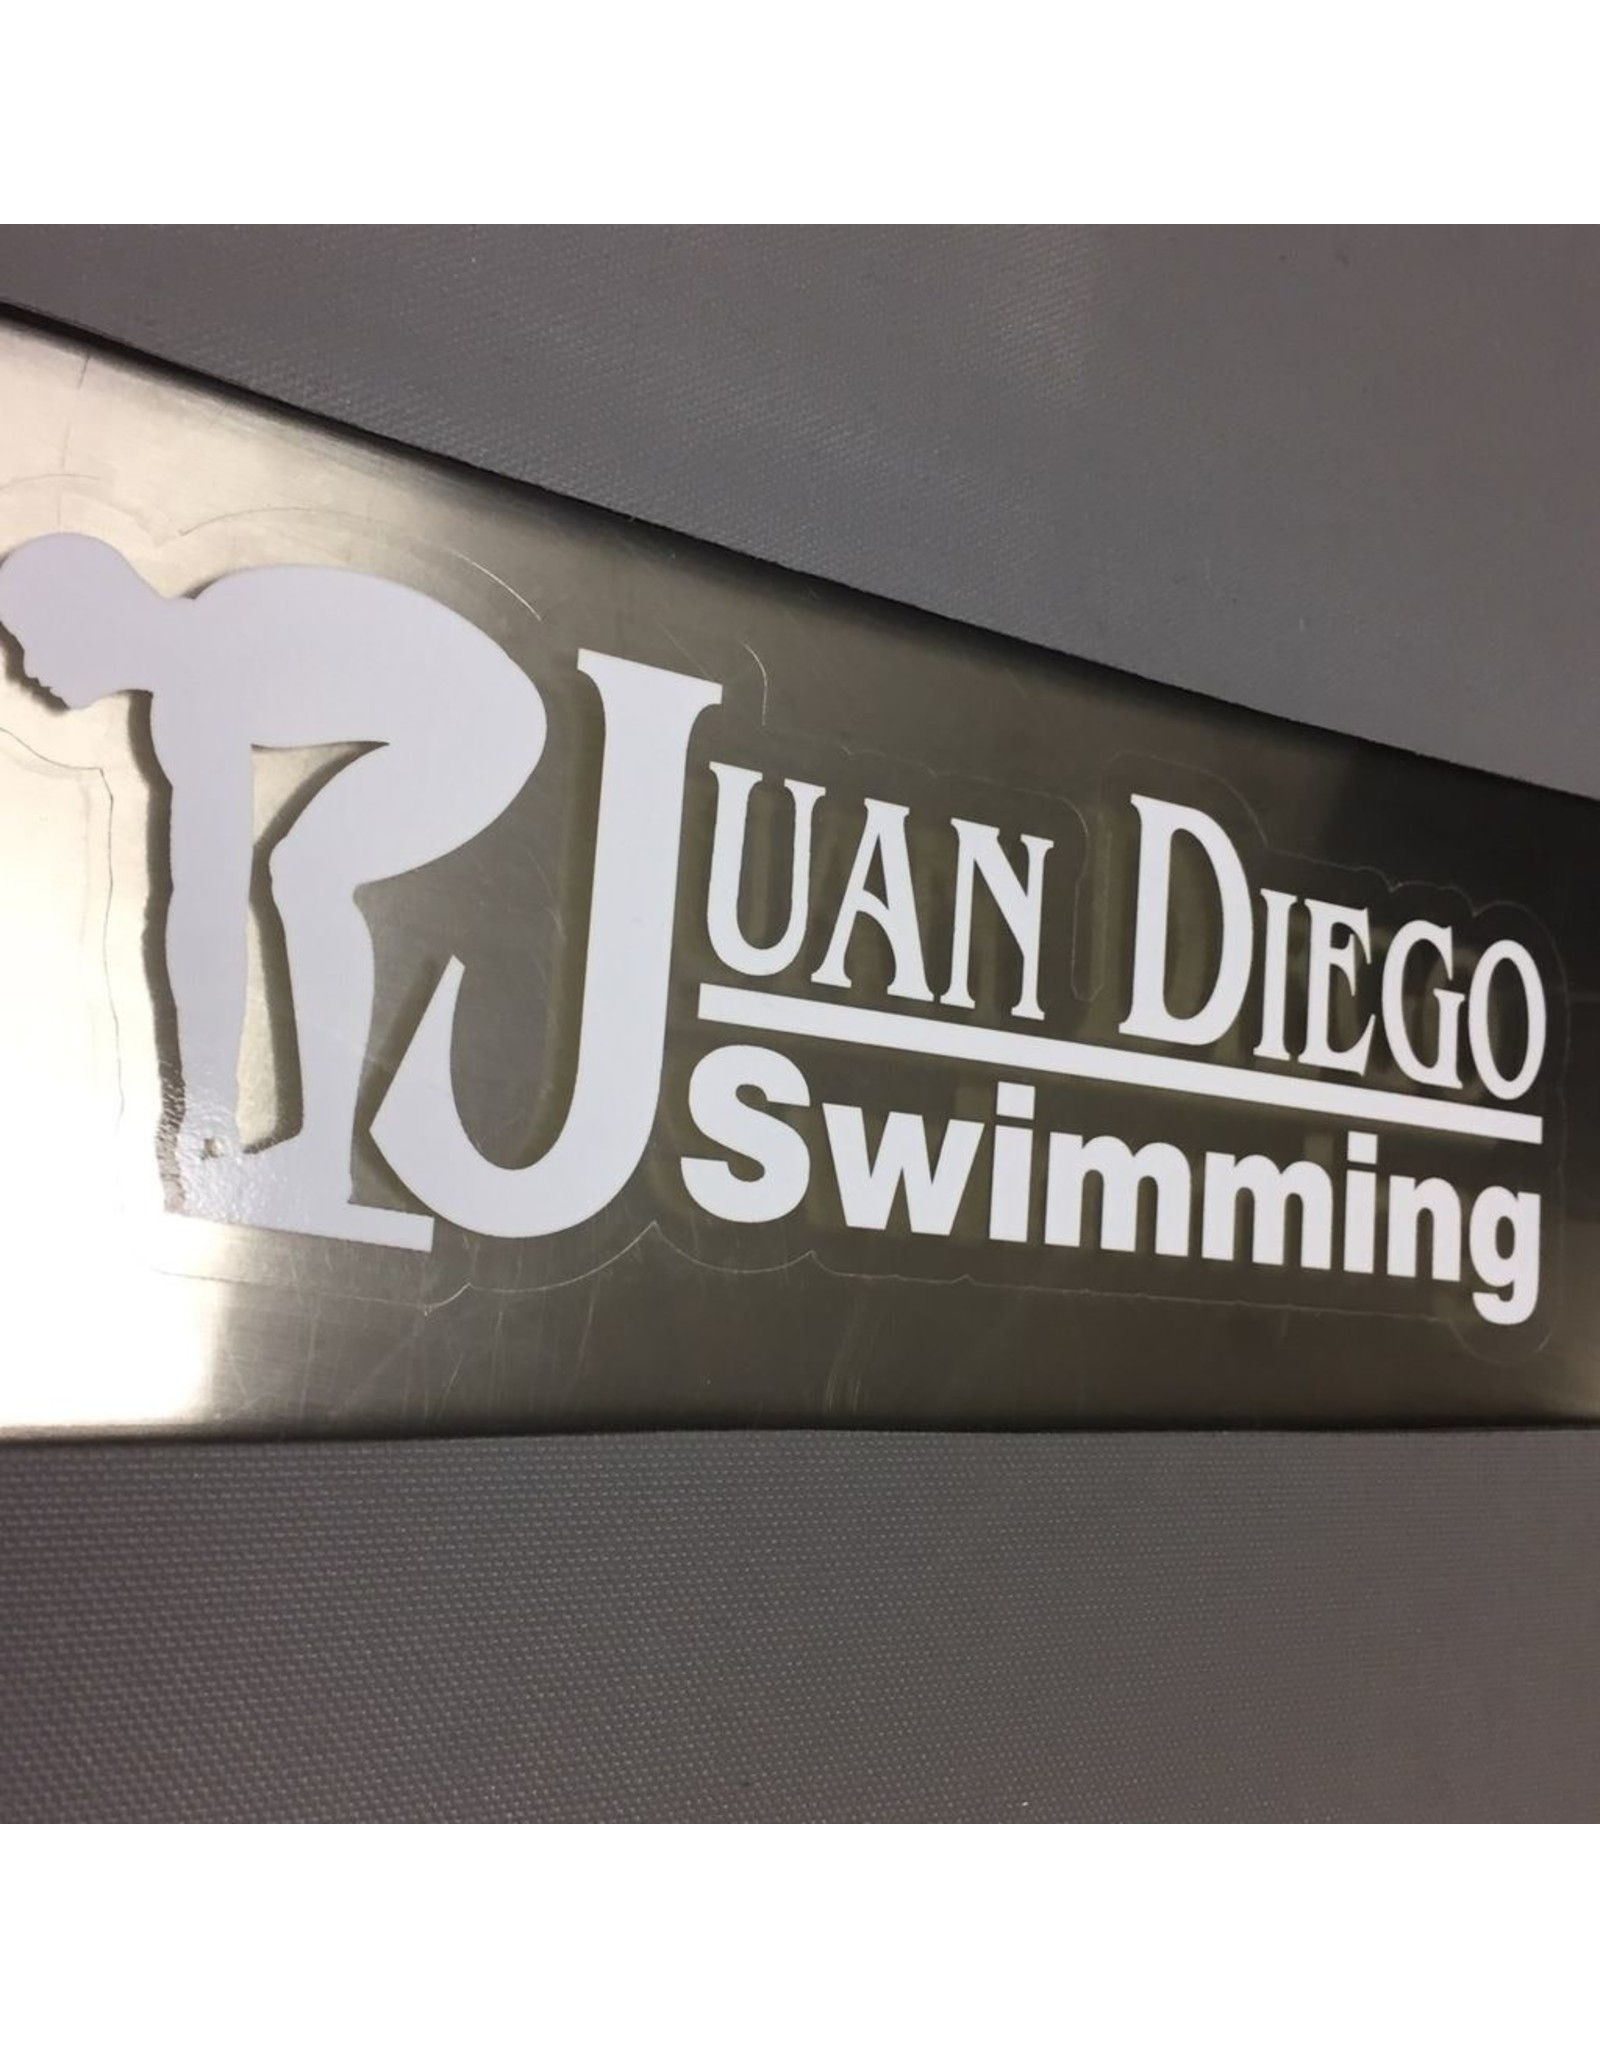 NON-UNIFORM Swimming - Decal, clearance, sold as is